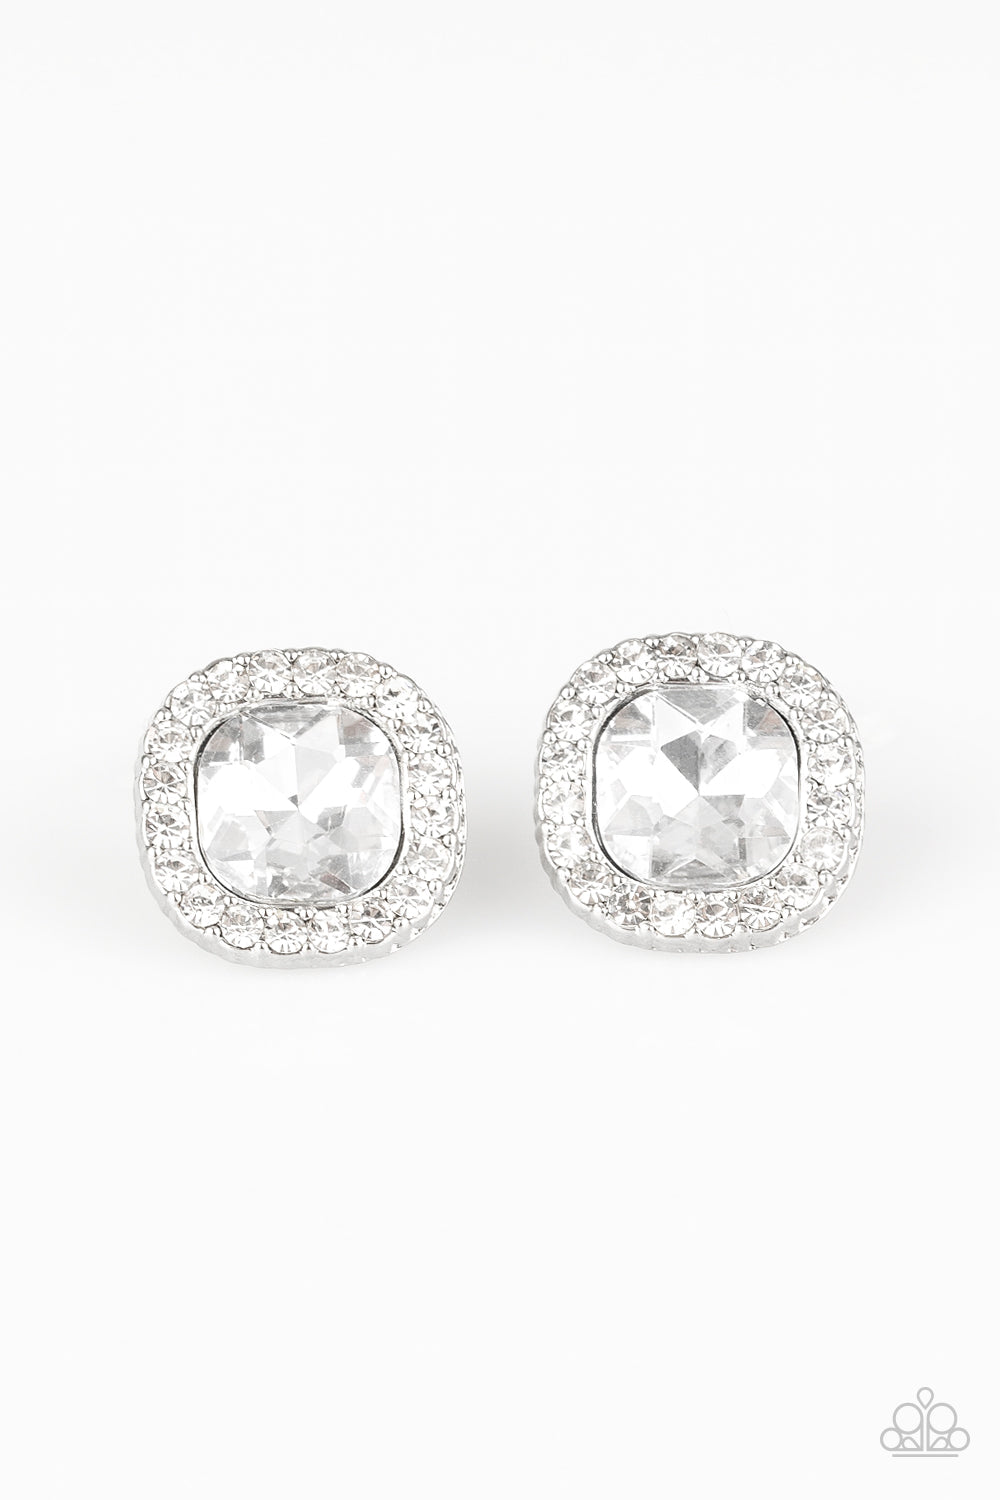 Bling Tastic! - White and Silver Gem Earrings - Paparazzi Accessories ...